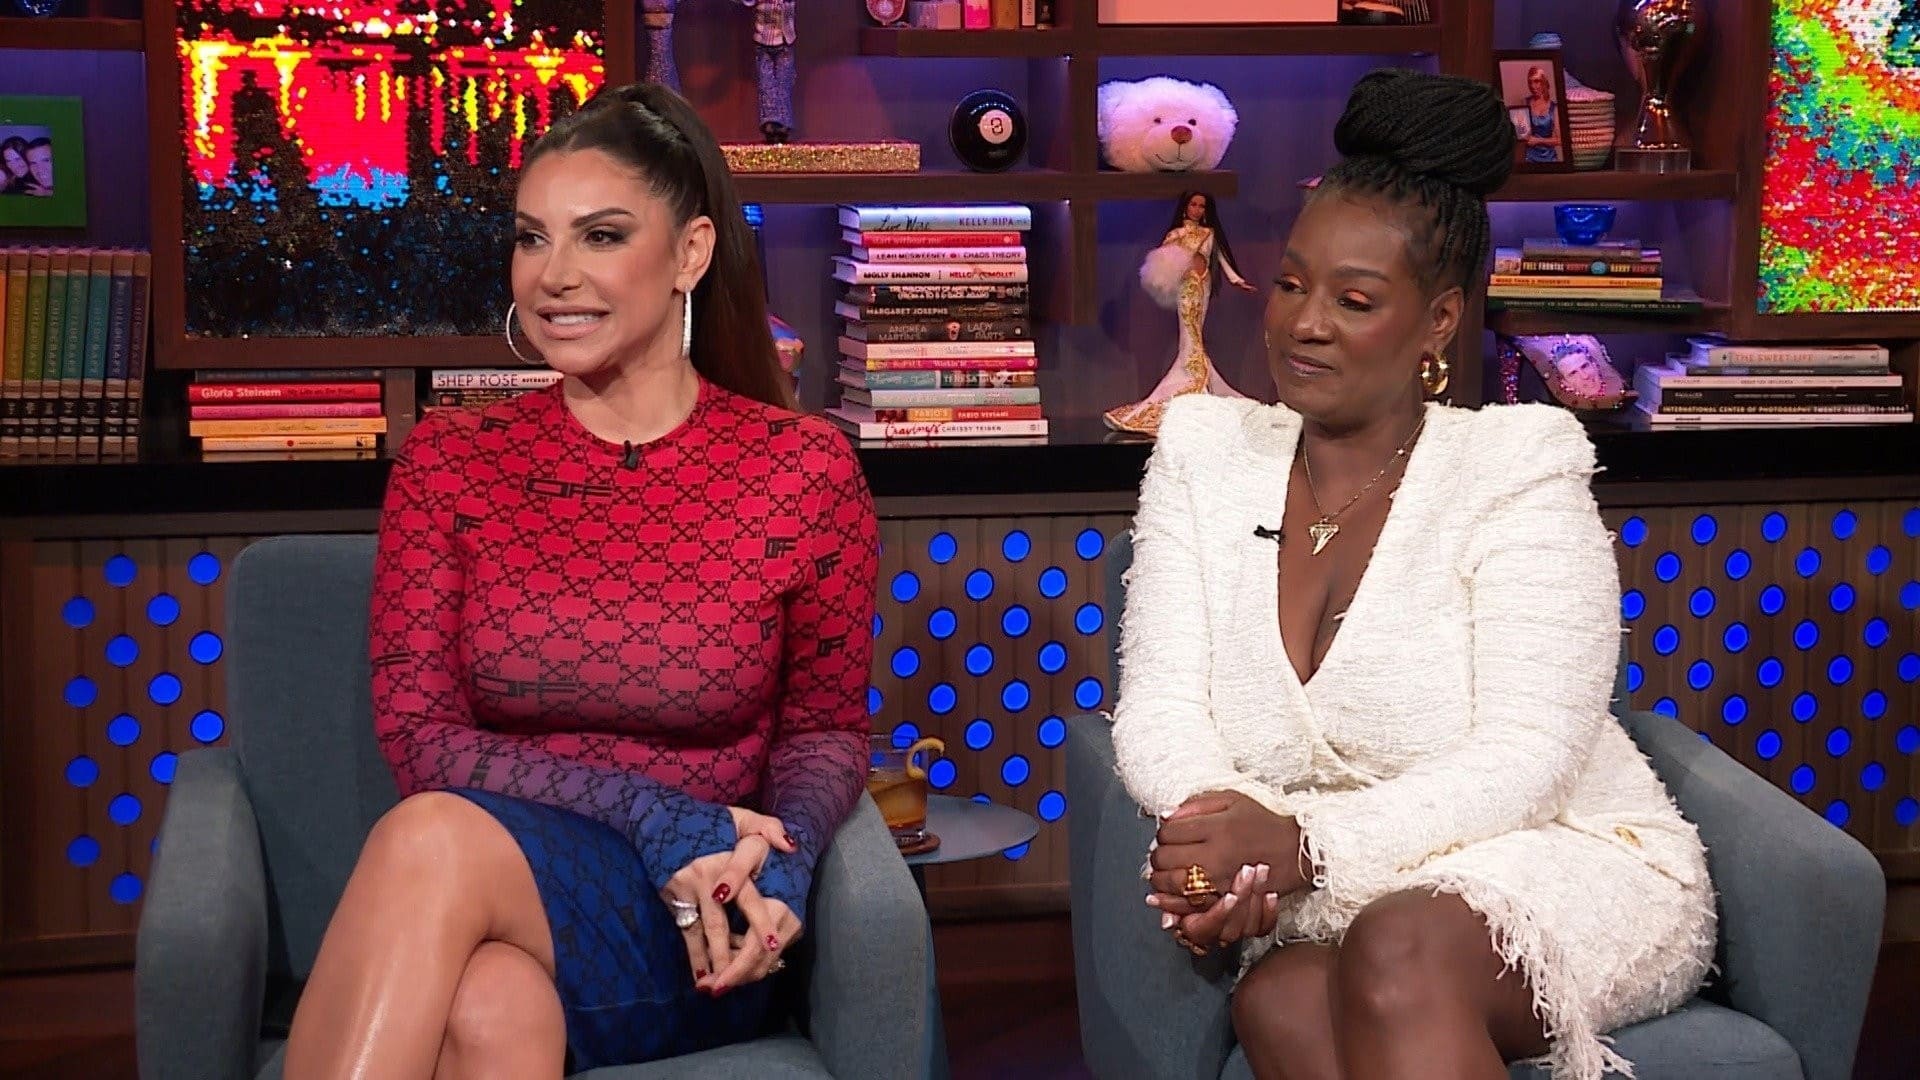 Watch What Happens Live with Andy Cohen Staffel 20 :Folge 40 